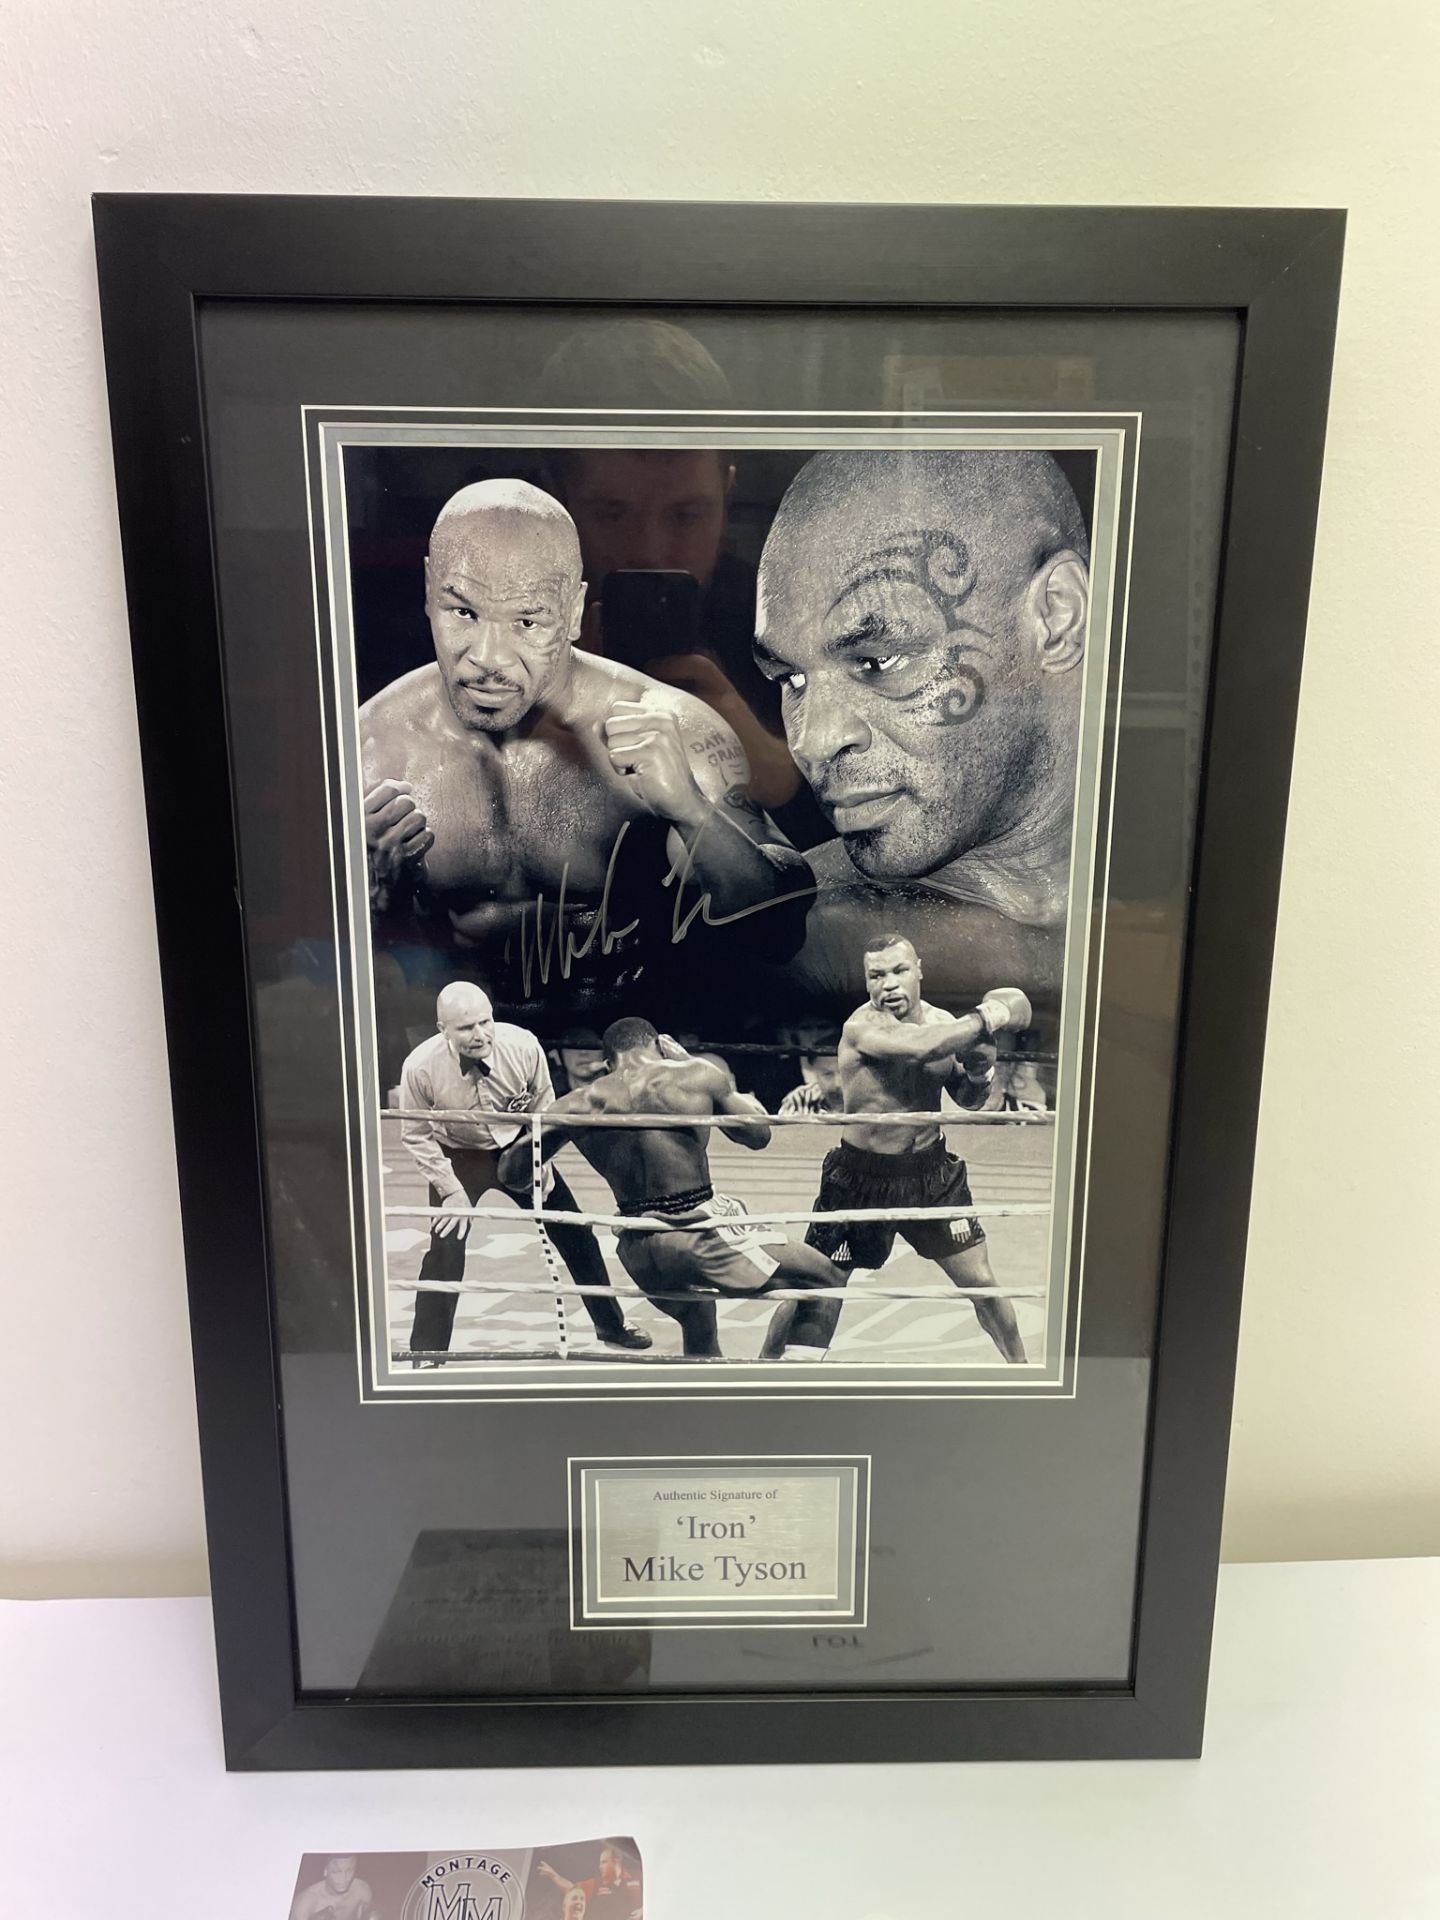 Iron' Mike Tyson Signed Picture in Display Frame w/ COA - Image 2 of 5